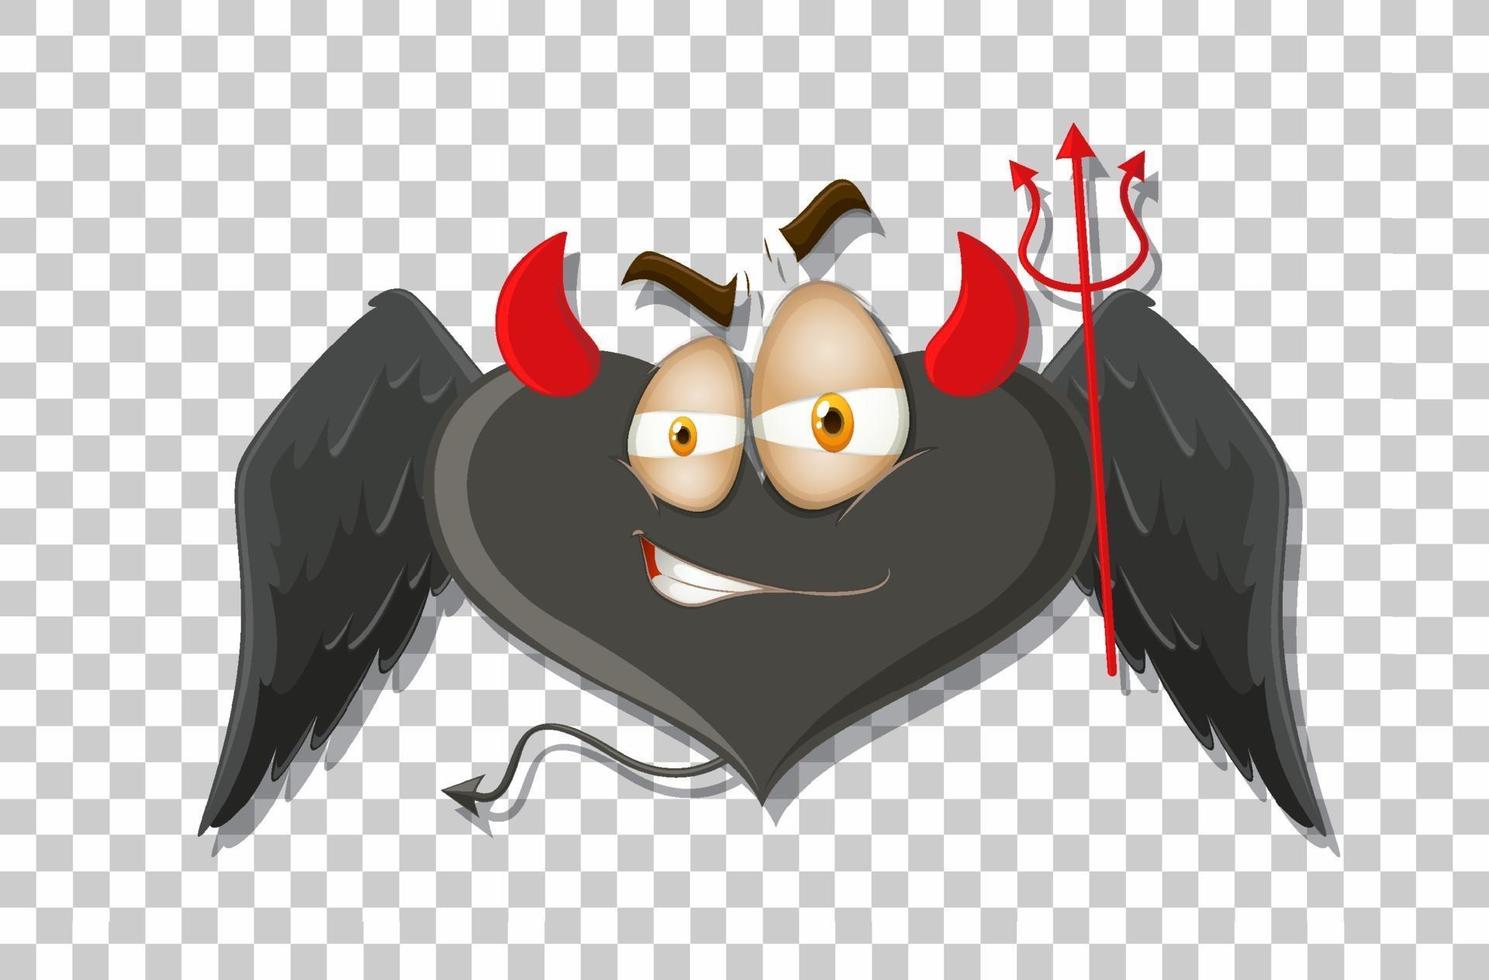 Heart shape devil with facial expression vector